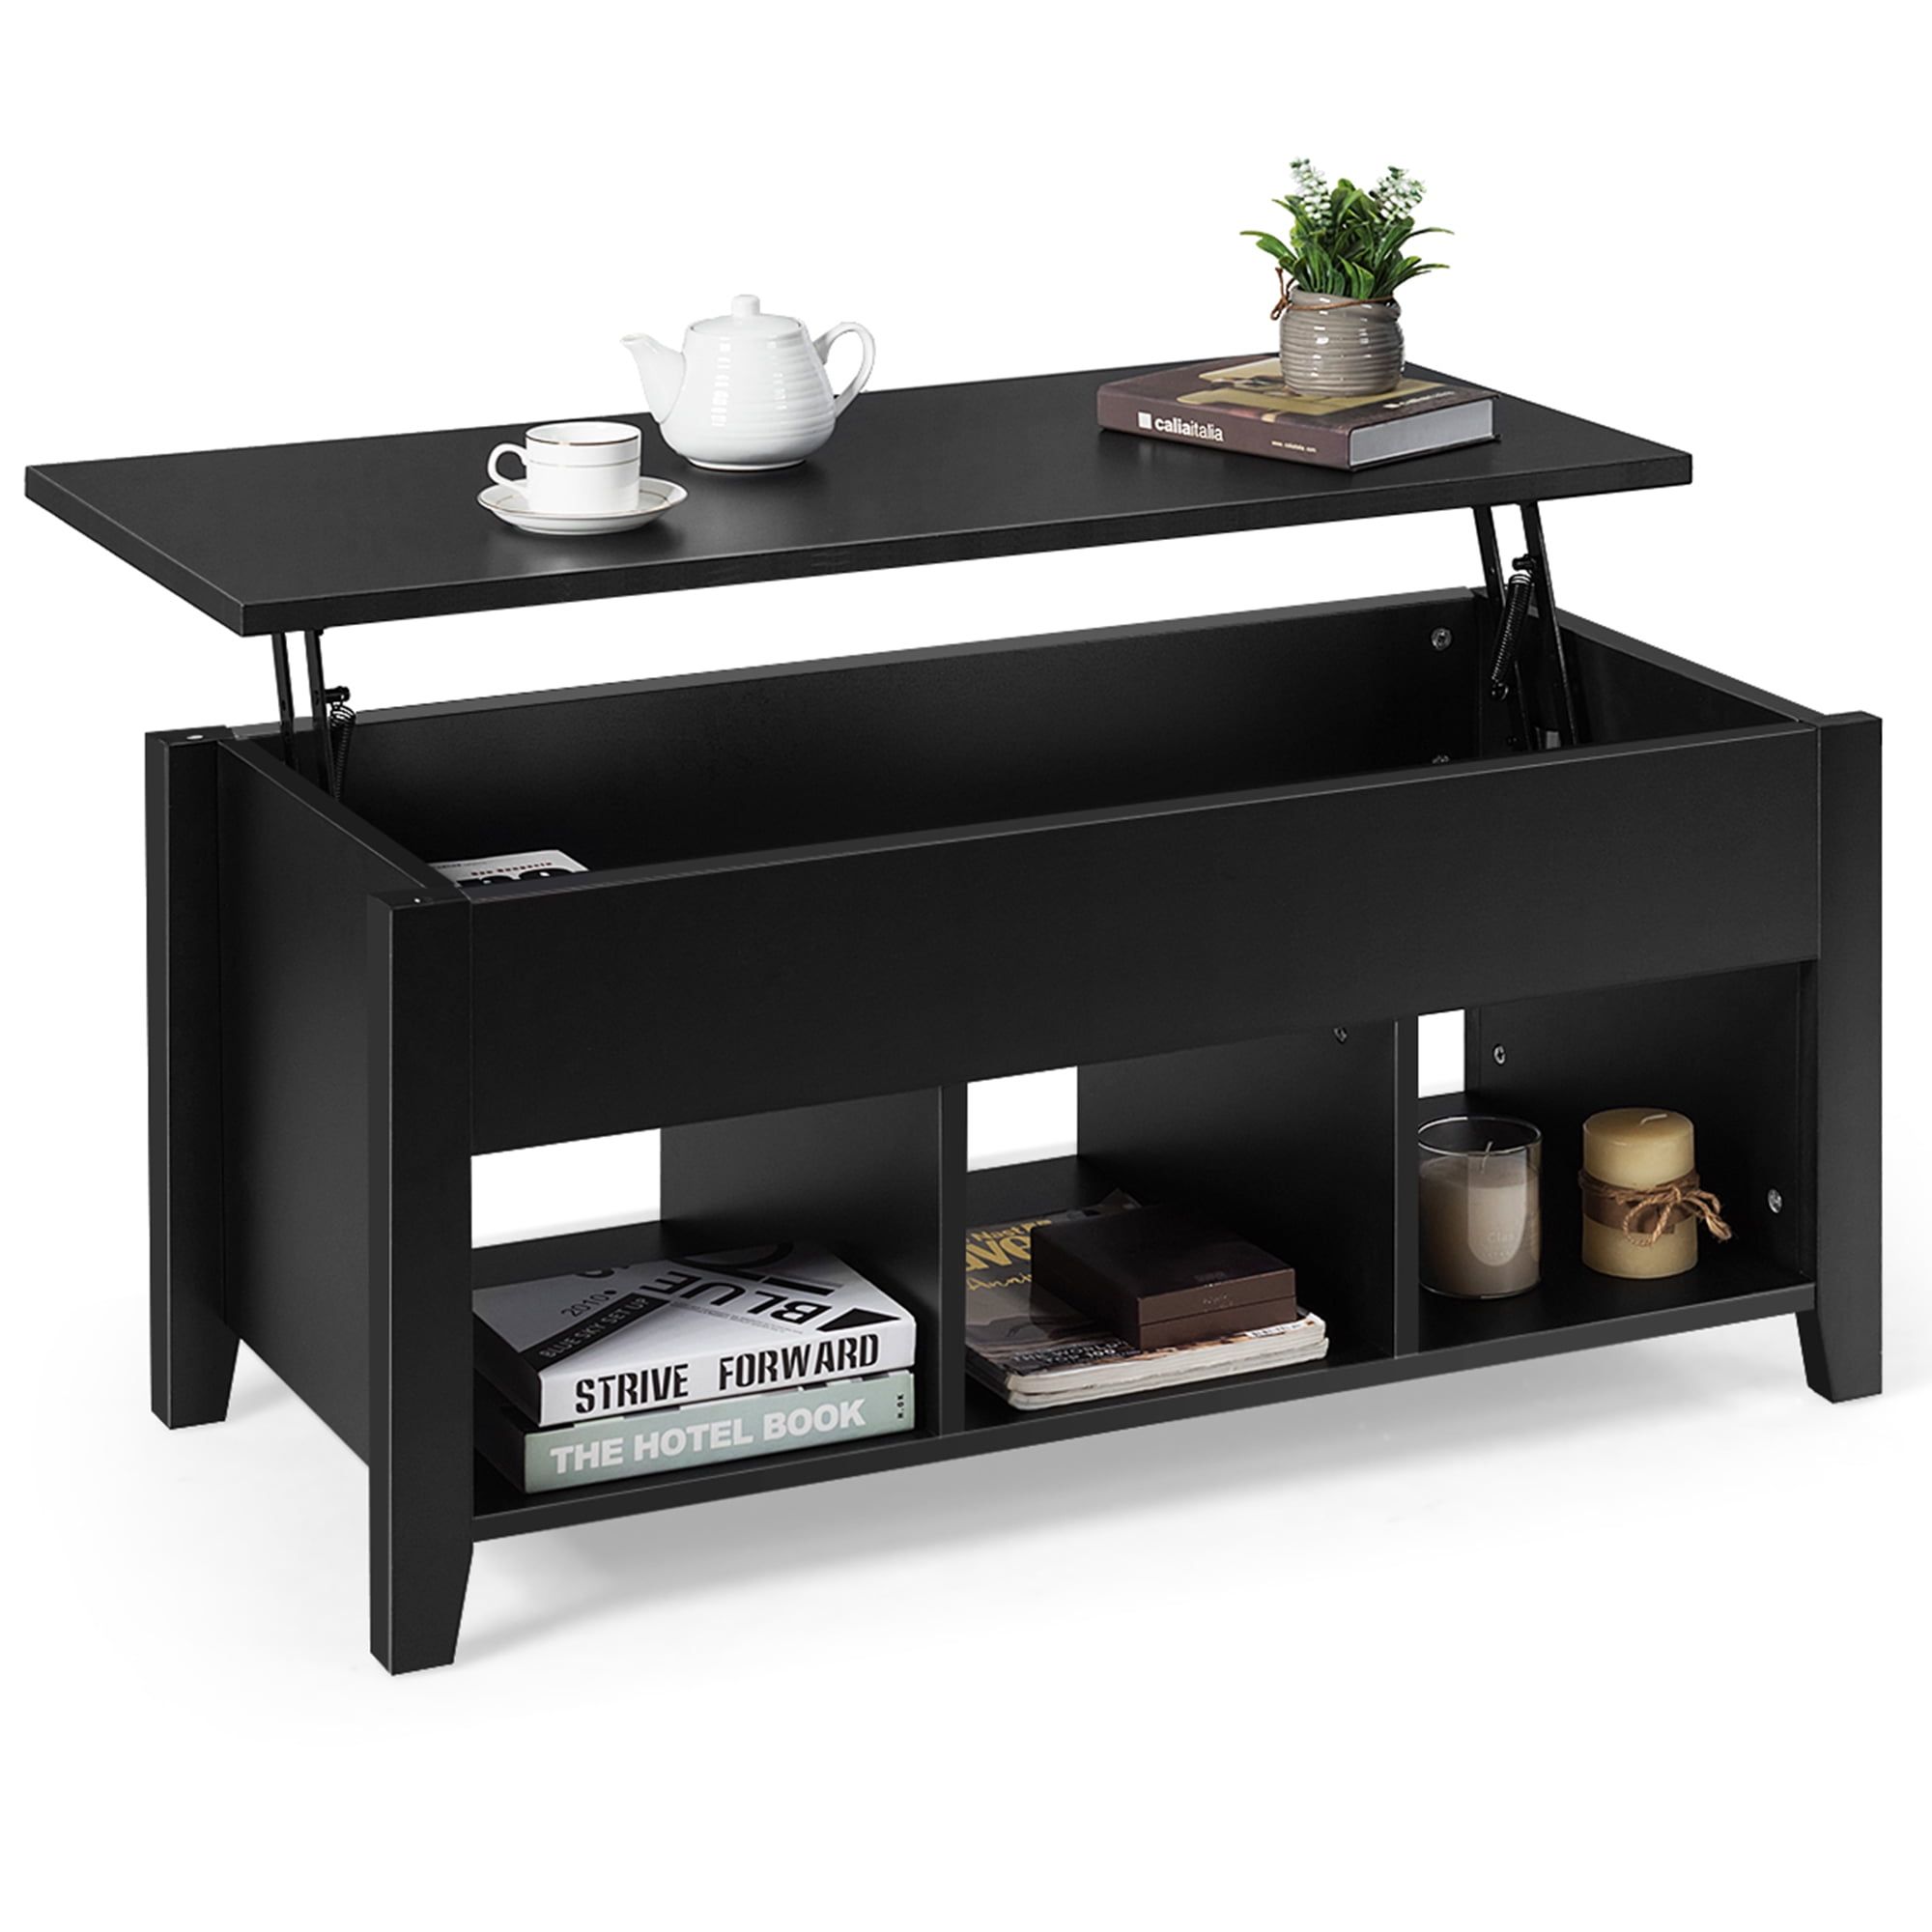 Gymax Lift Top Coffee Table W/ Storage Compartment Shelf Living Room Pertaining To Lift Top Coffee Tables With Shelves (View 6 of 15)